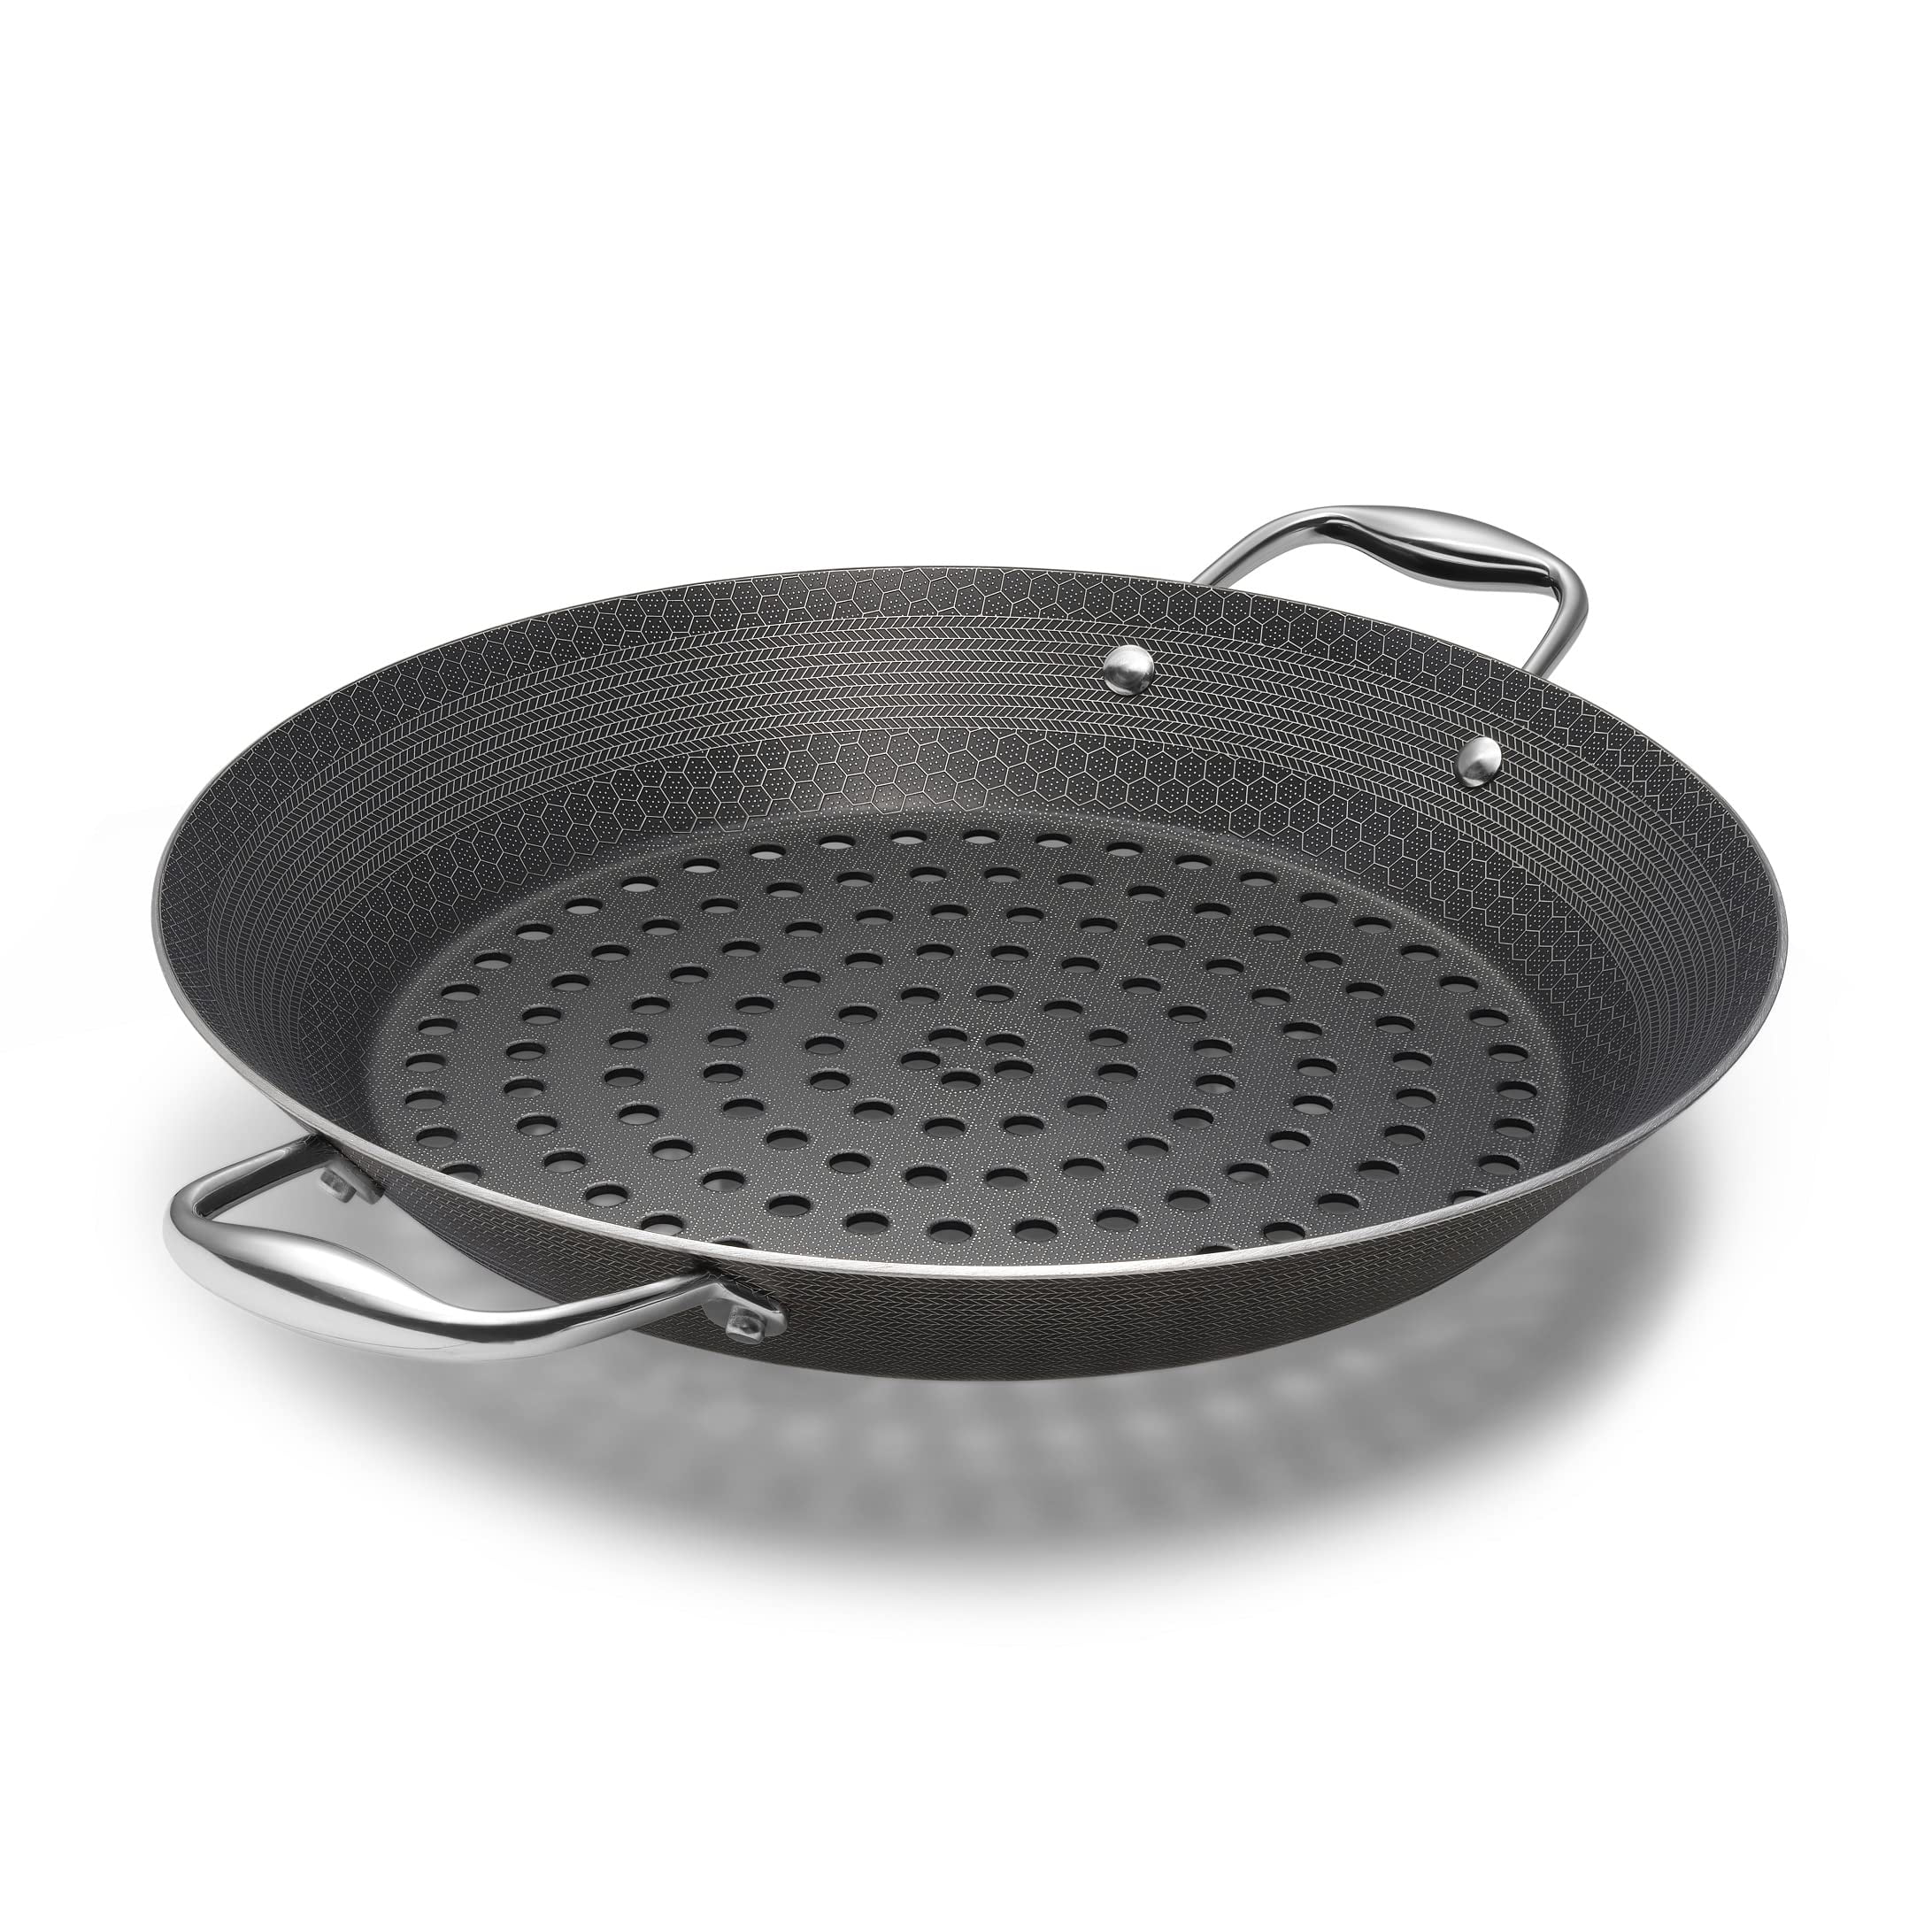 HEXCLAD hexclad 12 inch hybrid stainless steel griddle non stick